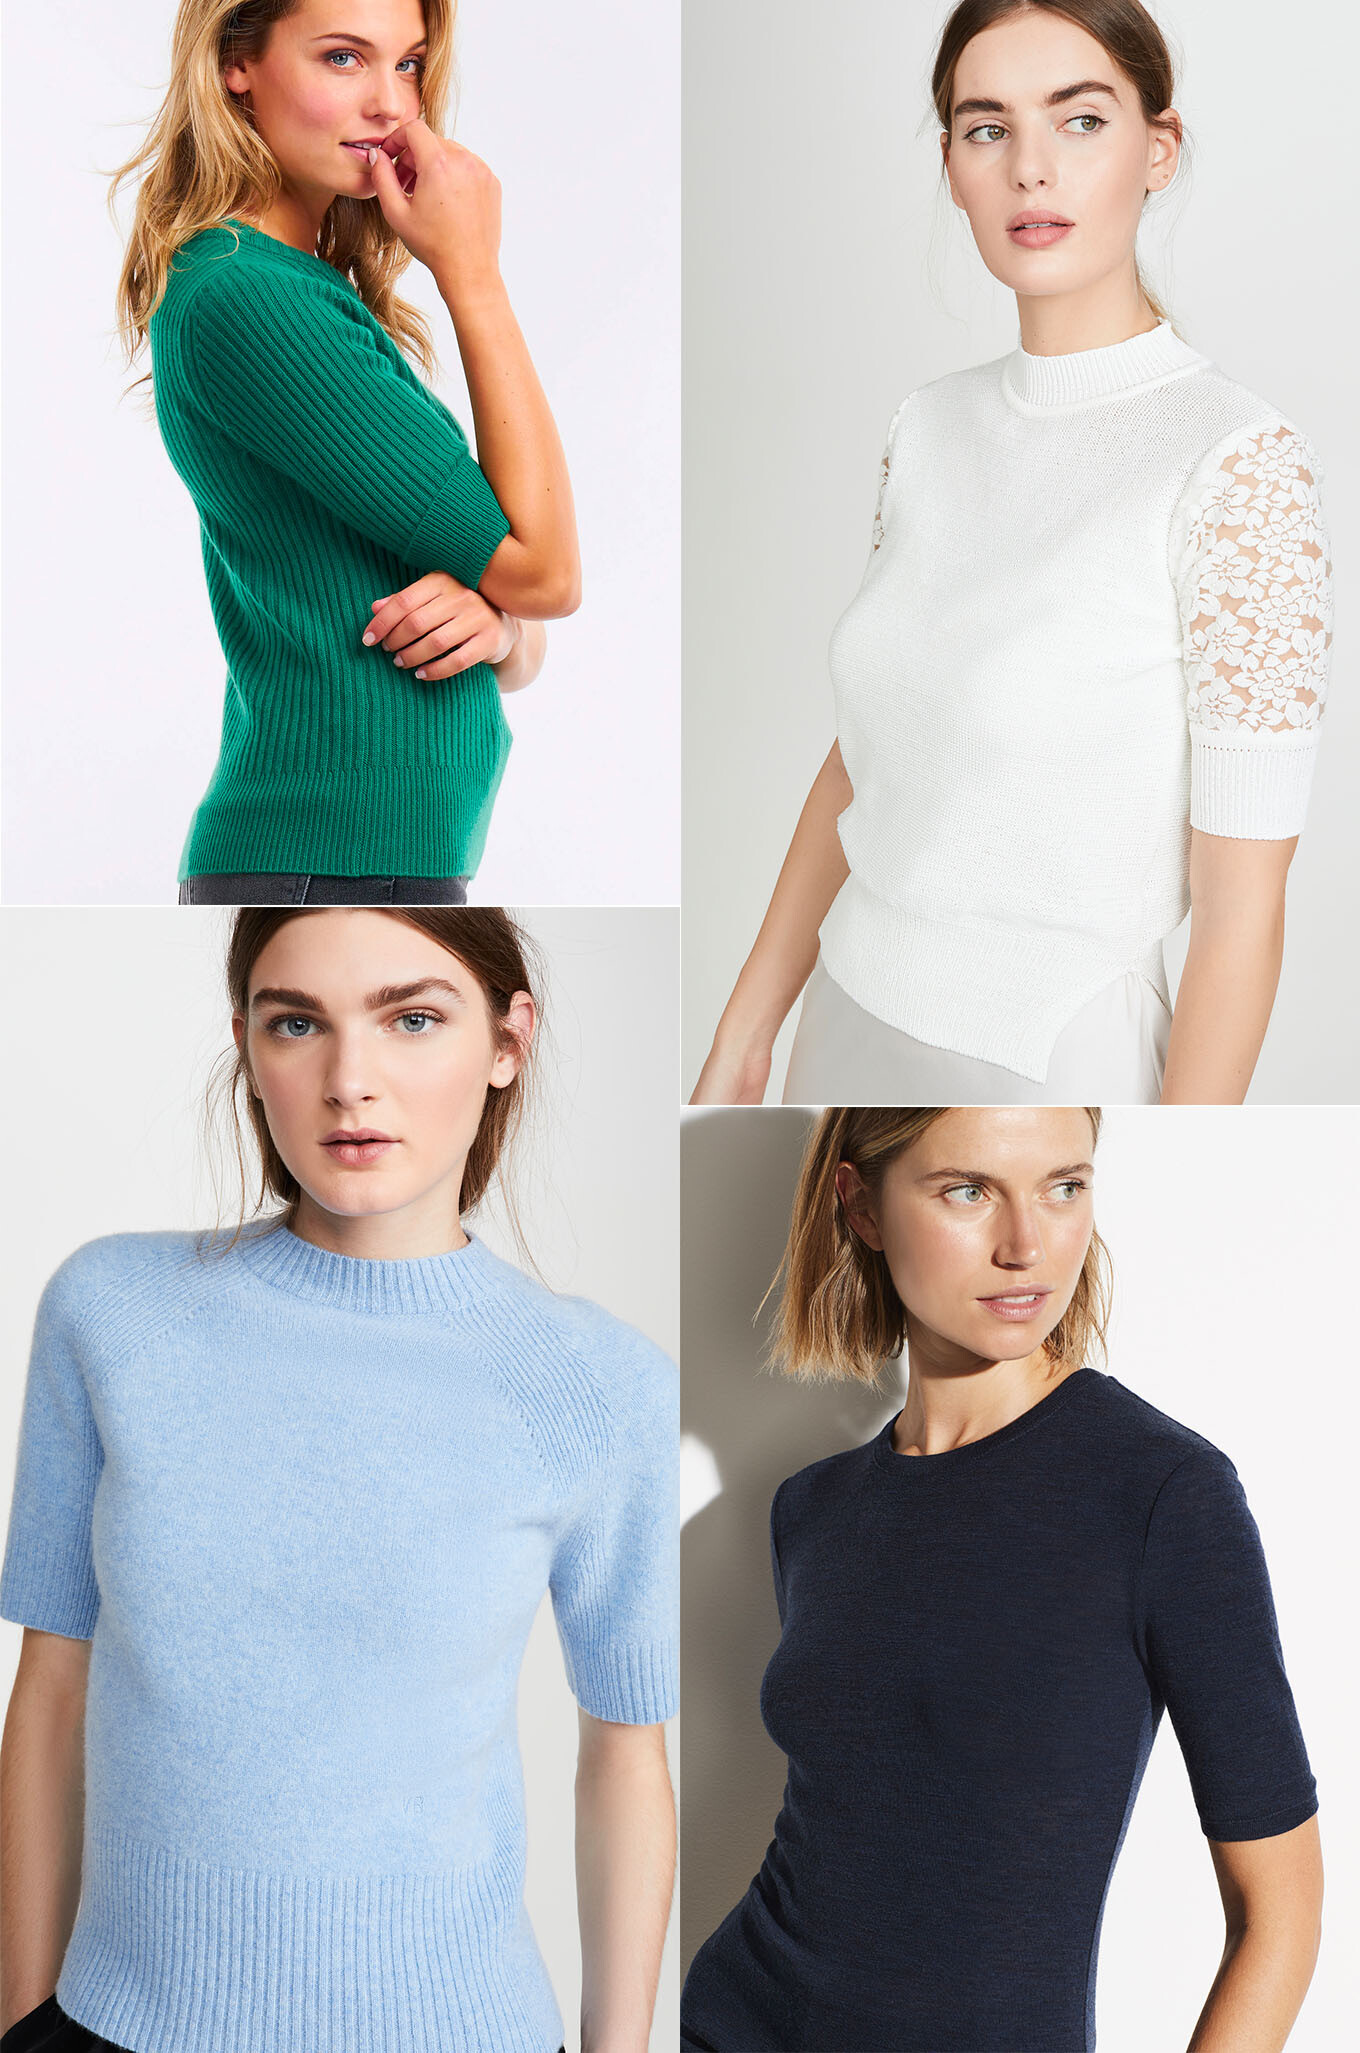 Don't worry, you can still wear short sleeve tops and feel your best! Try these Elbow length sleeves that are flattering and hide any upper arm flaws.